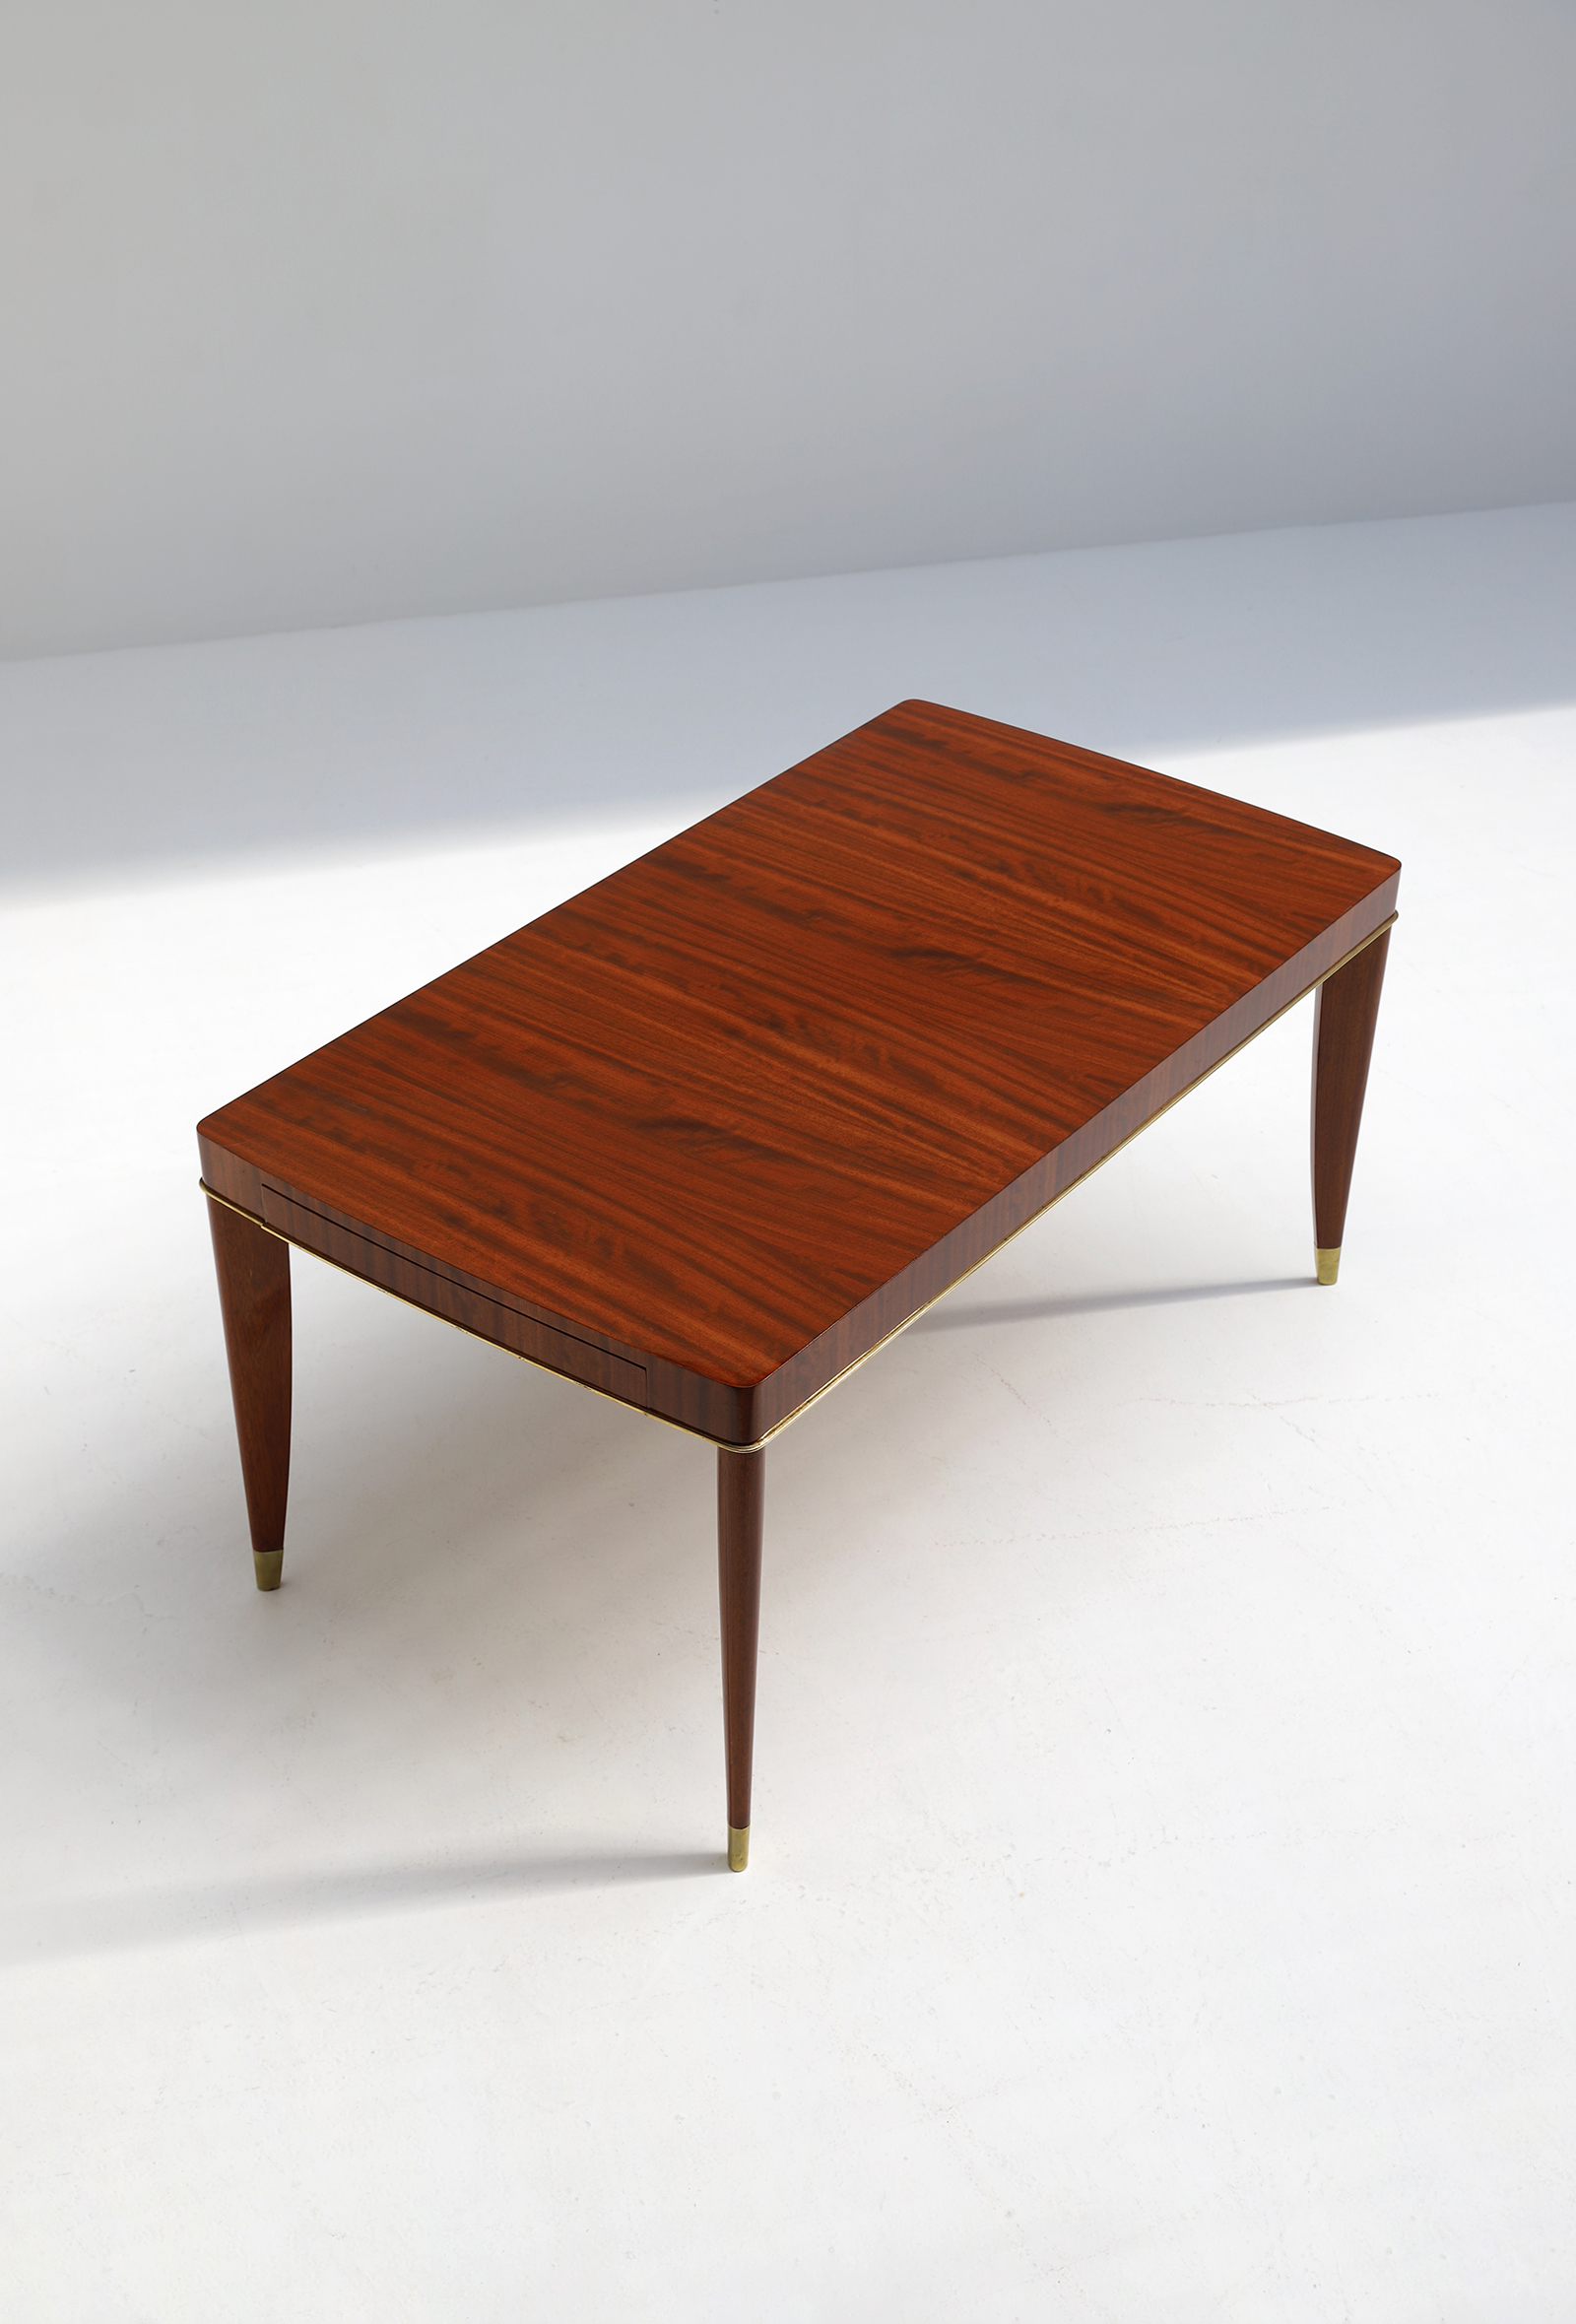 De Coene Dining Voltaire Table 1930simage 2